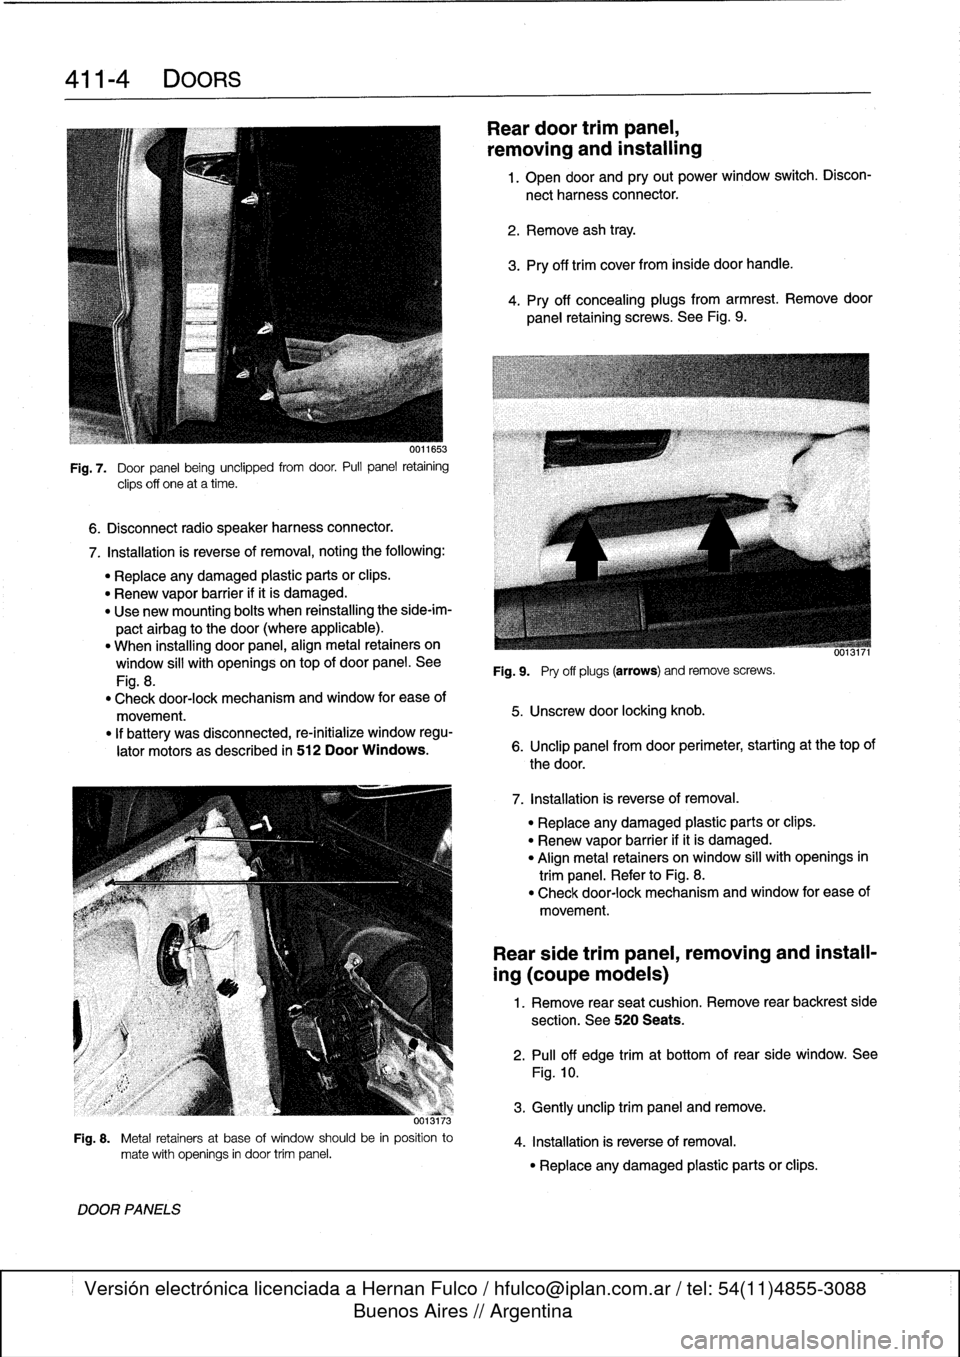 BMW 318i 1995 E36 Workshop Manual 
411-
4
DOORS

6
.
Disconnect
radio
speaker
harness
connector
.

Fig
.
7
.

	

Door
panel
being
unclipped
from
door
.
Pull
panel
retaining

clips
off
one
at
a
time
.

7
.
Installation
is
reverse
of
re